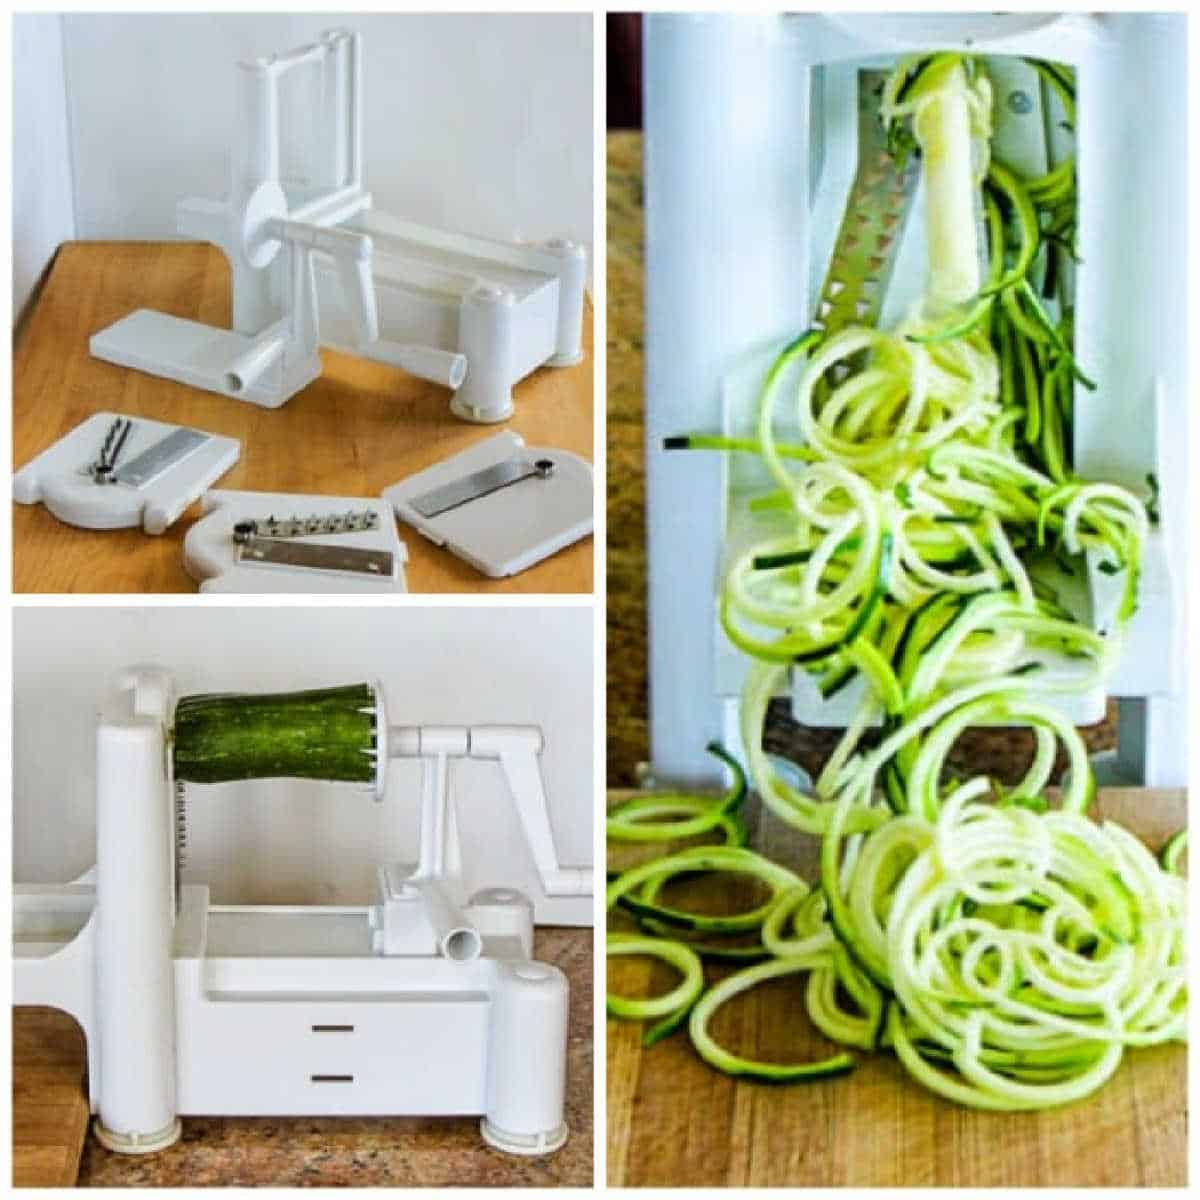 How to make zucchini noodles with Spiralizer